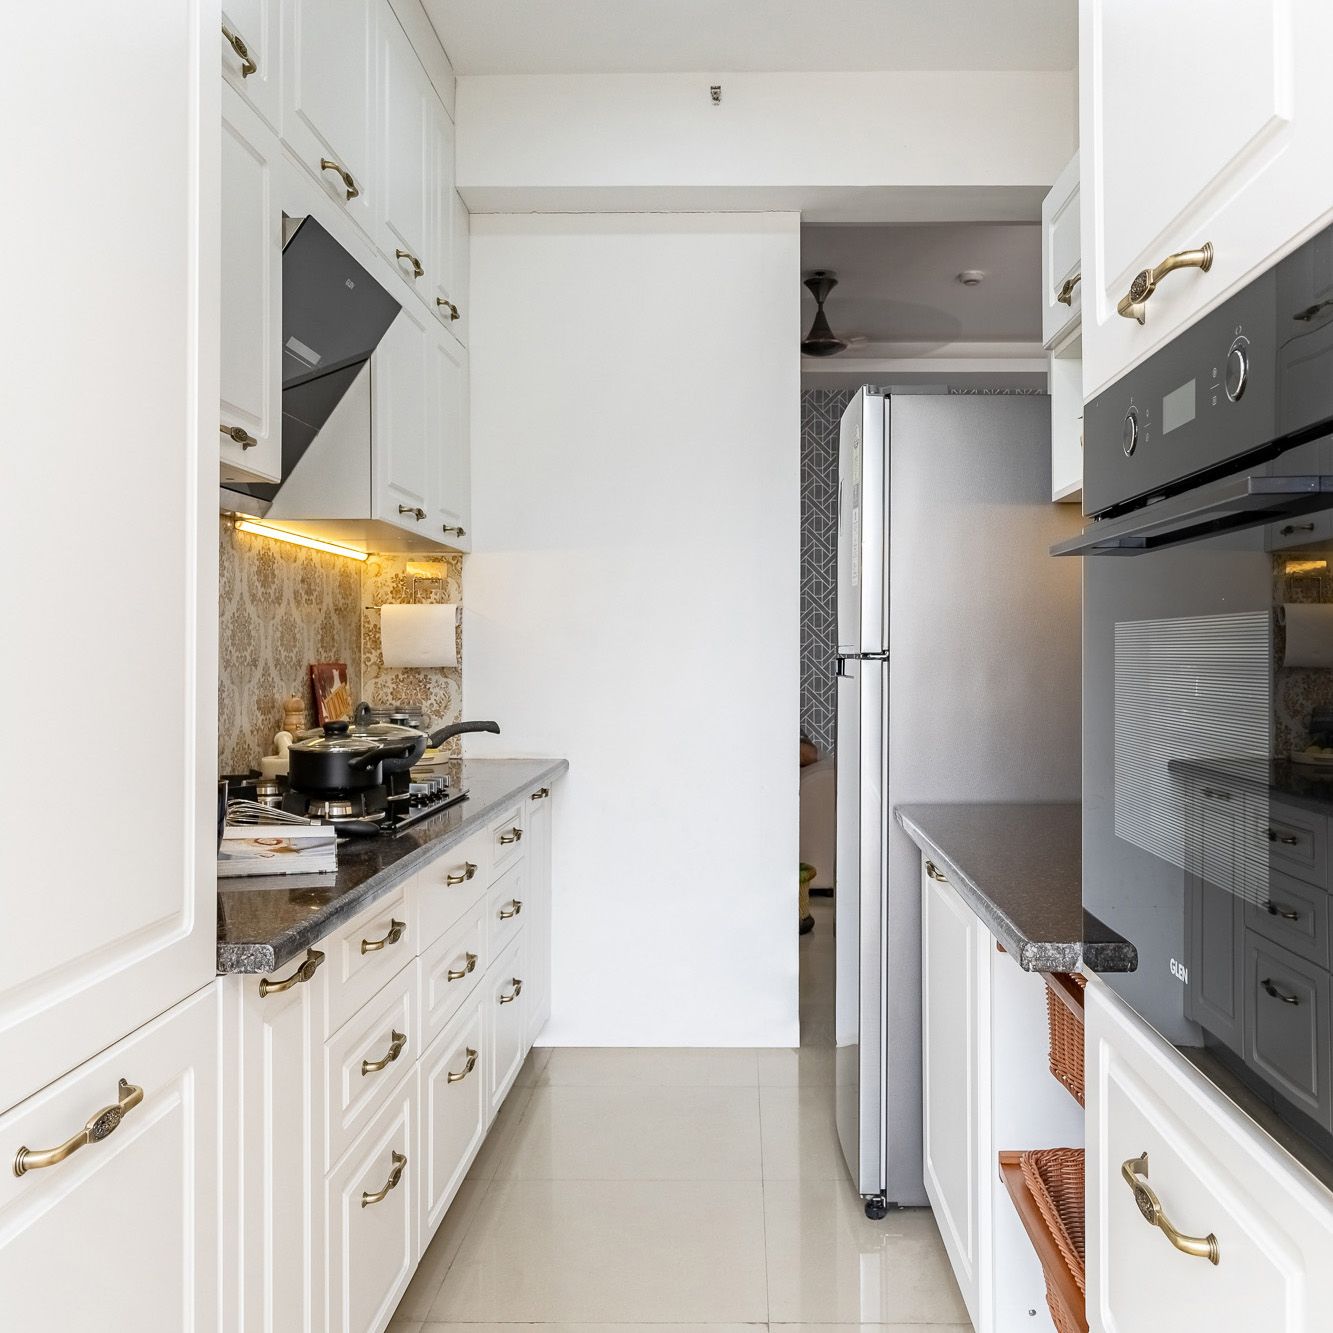 Mid-Century Parallel Kitchen Design With White Closed Storage Cabinets